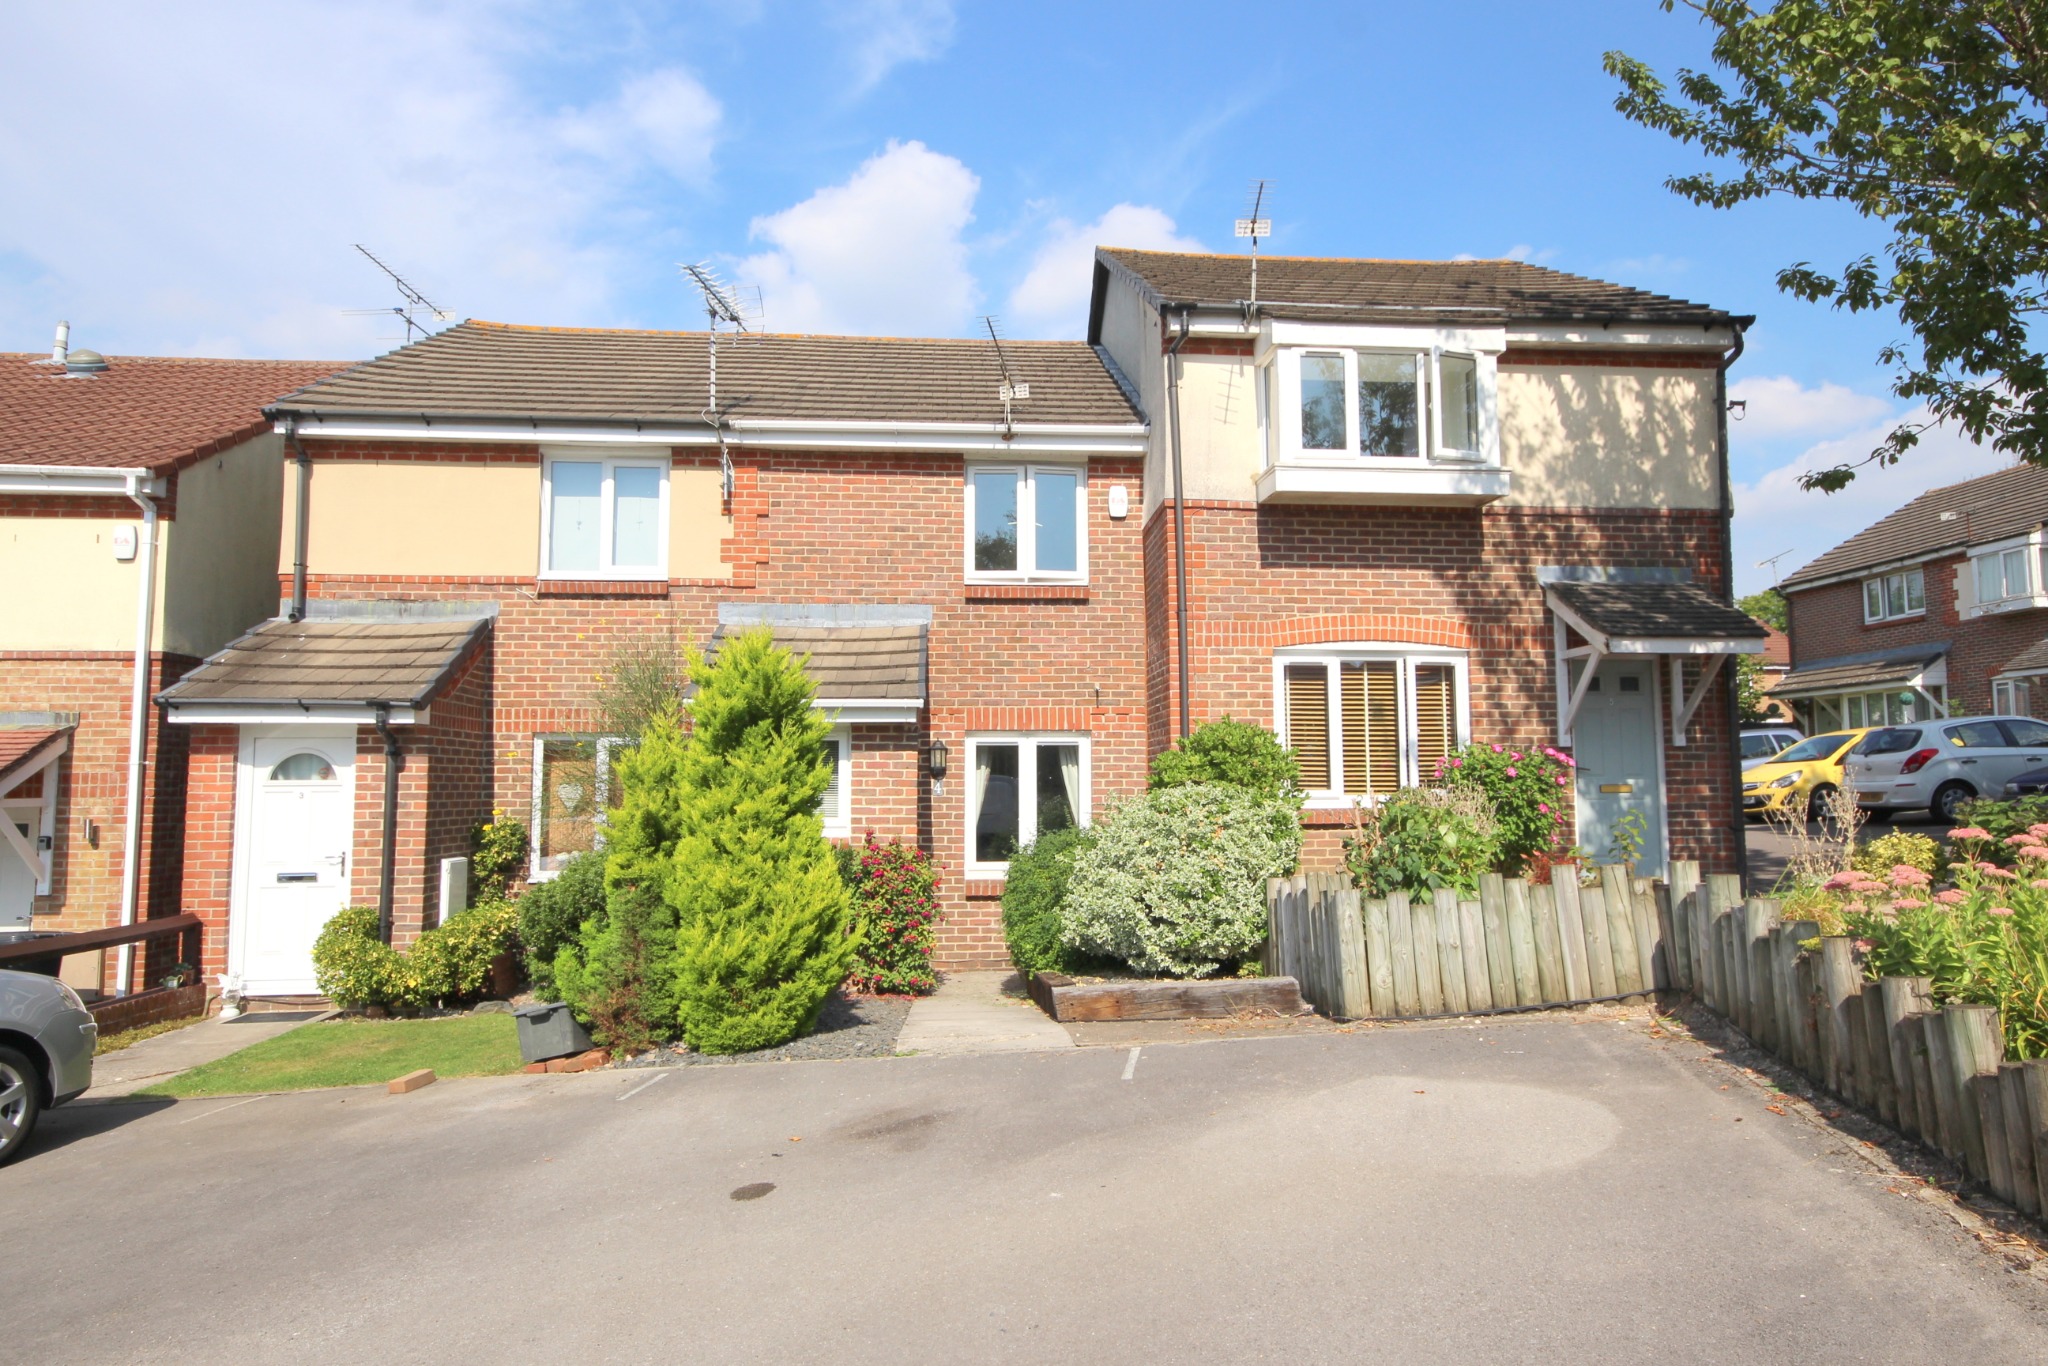 2 bed Mid Terraced House for rent in Waterlooville. From Pearsons Estate Agents - Waterlooville